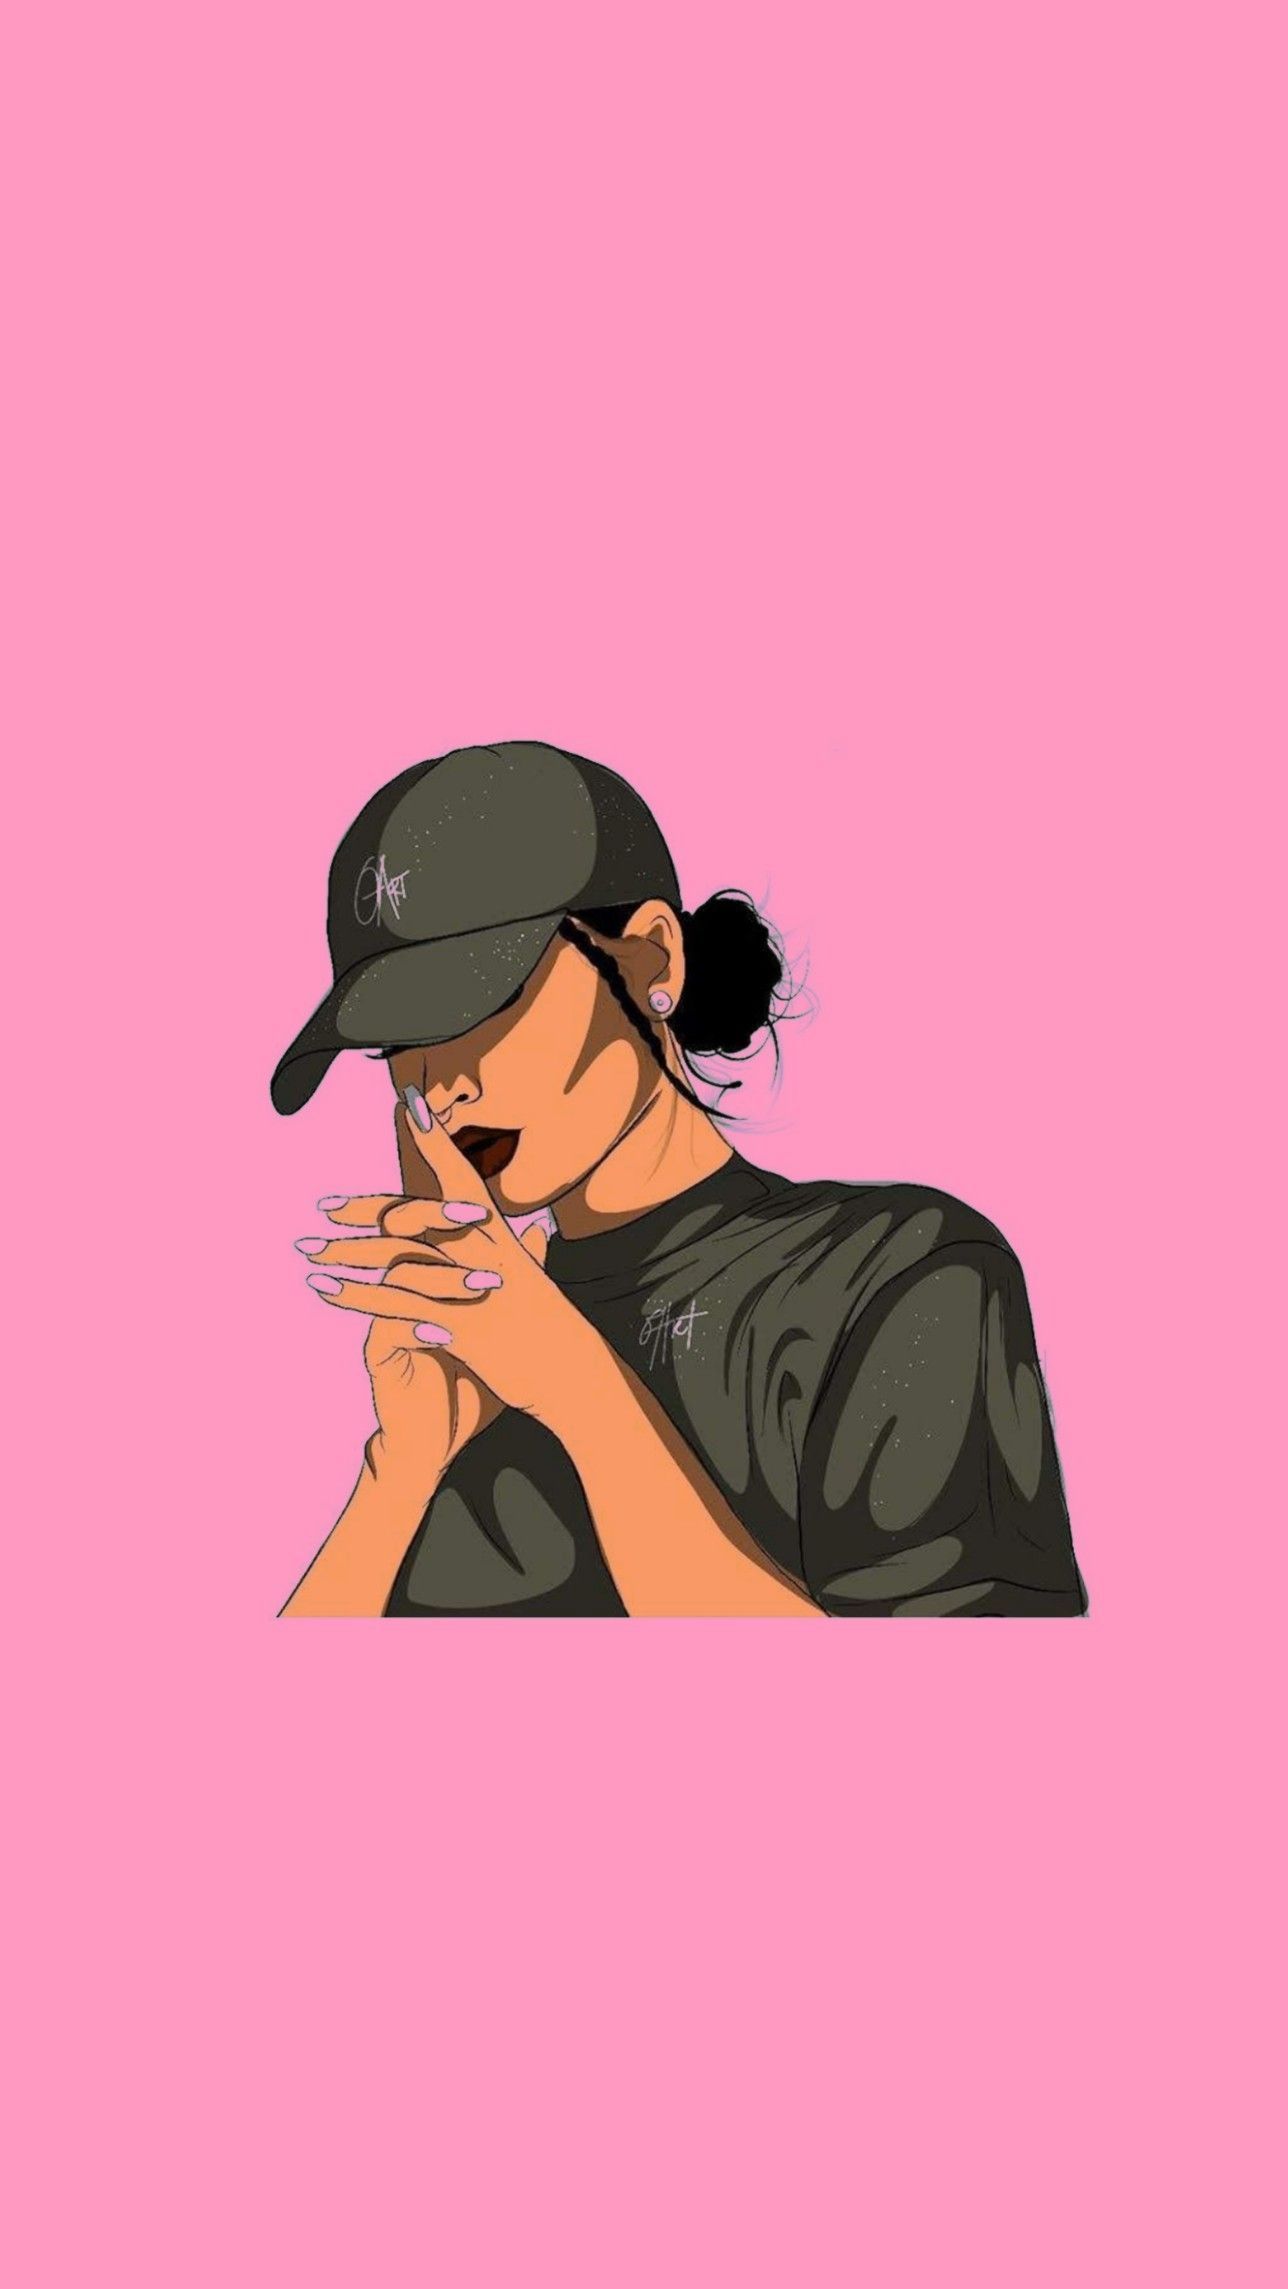 Aesthetic wallpaper of a girl in a hat on a pink background - Baddie